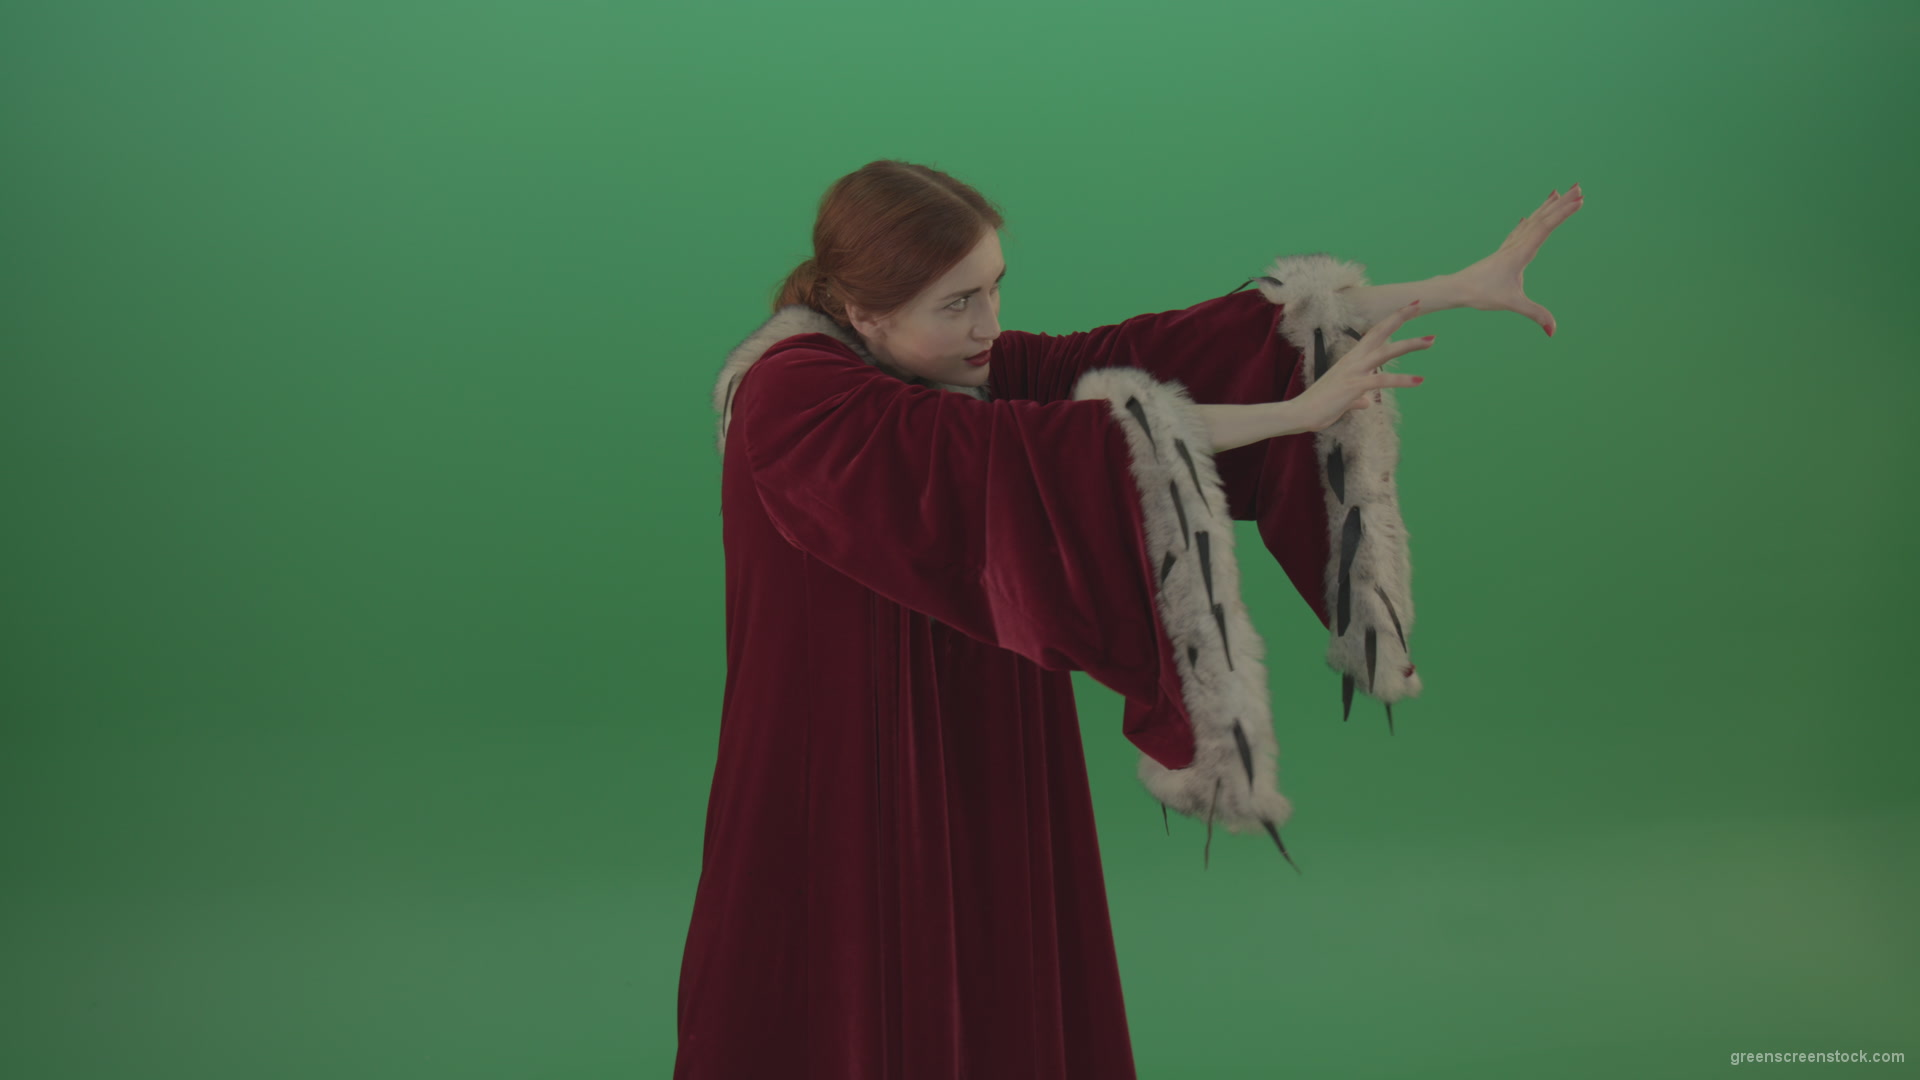 Girl-is-dressed-in-a-red-cloak-shoots-proton-lasers-_009 Green Screen Stock